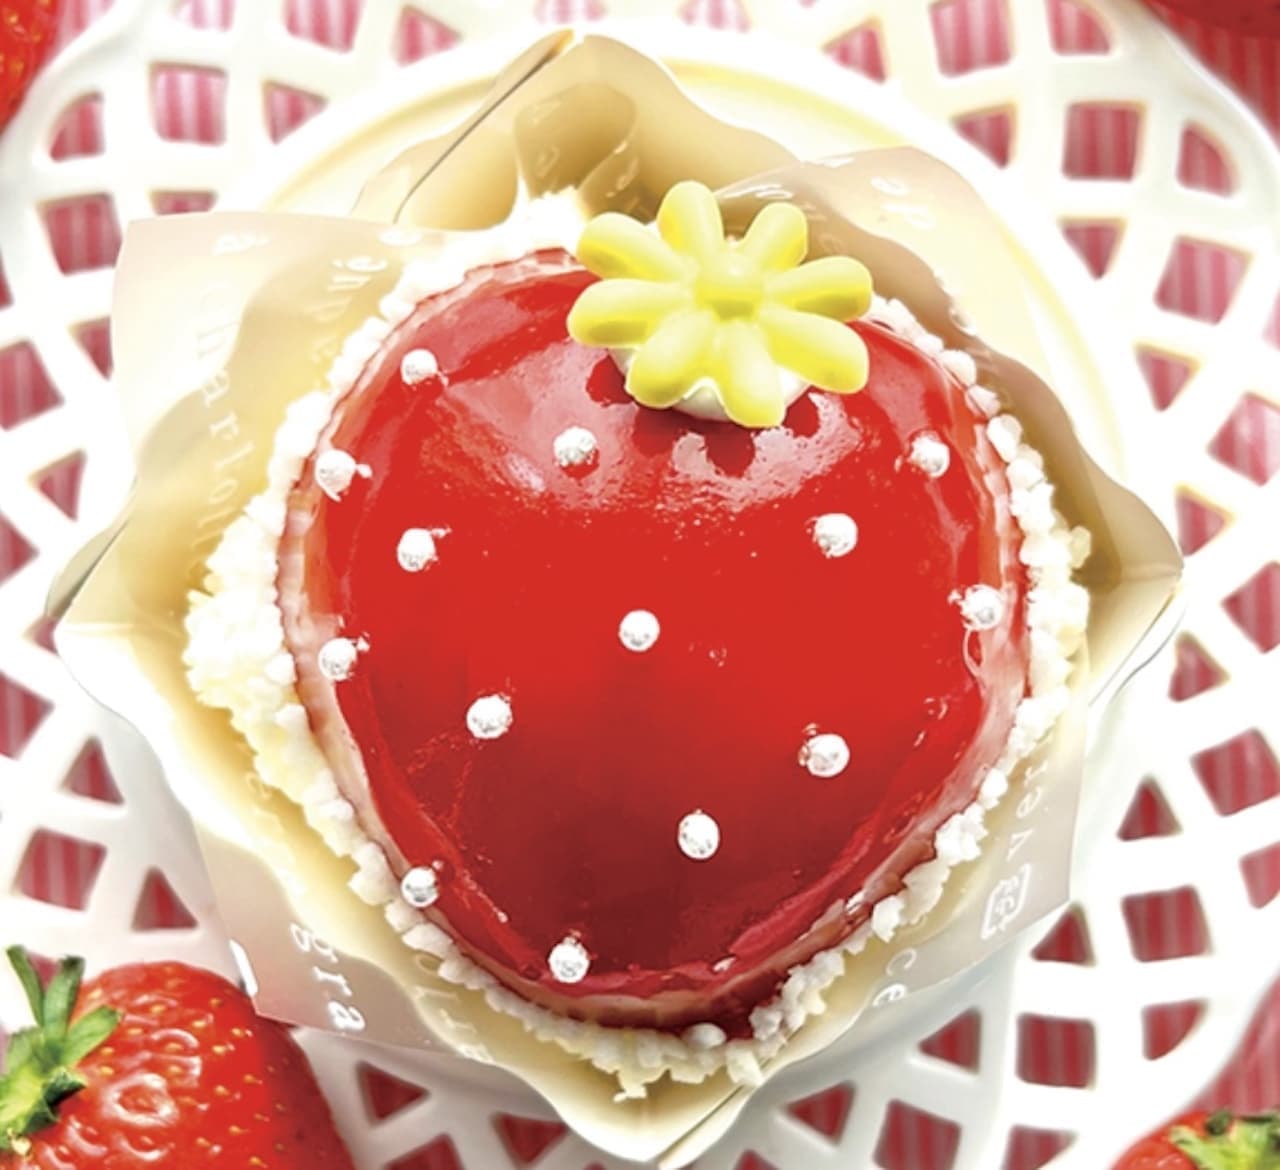 Chateraise "Rare cheese milk rape of strawberries using Tochiotome seed strawberries"